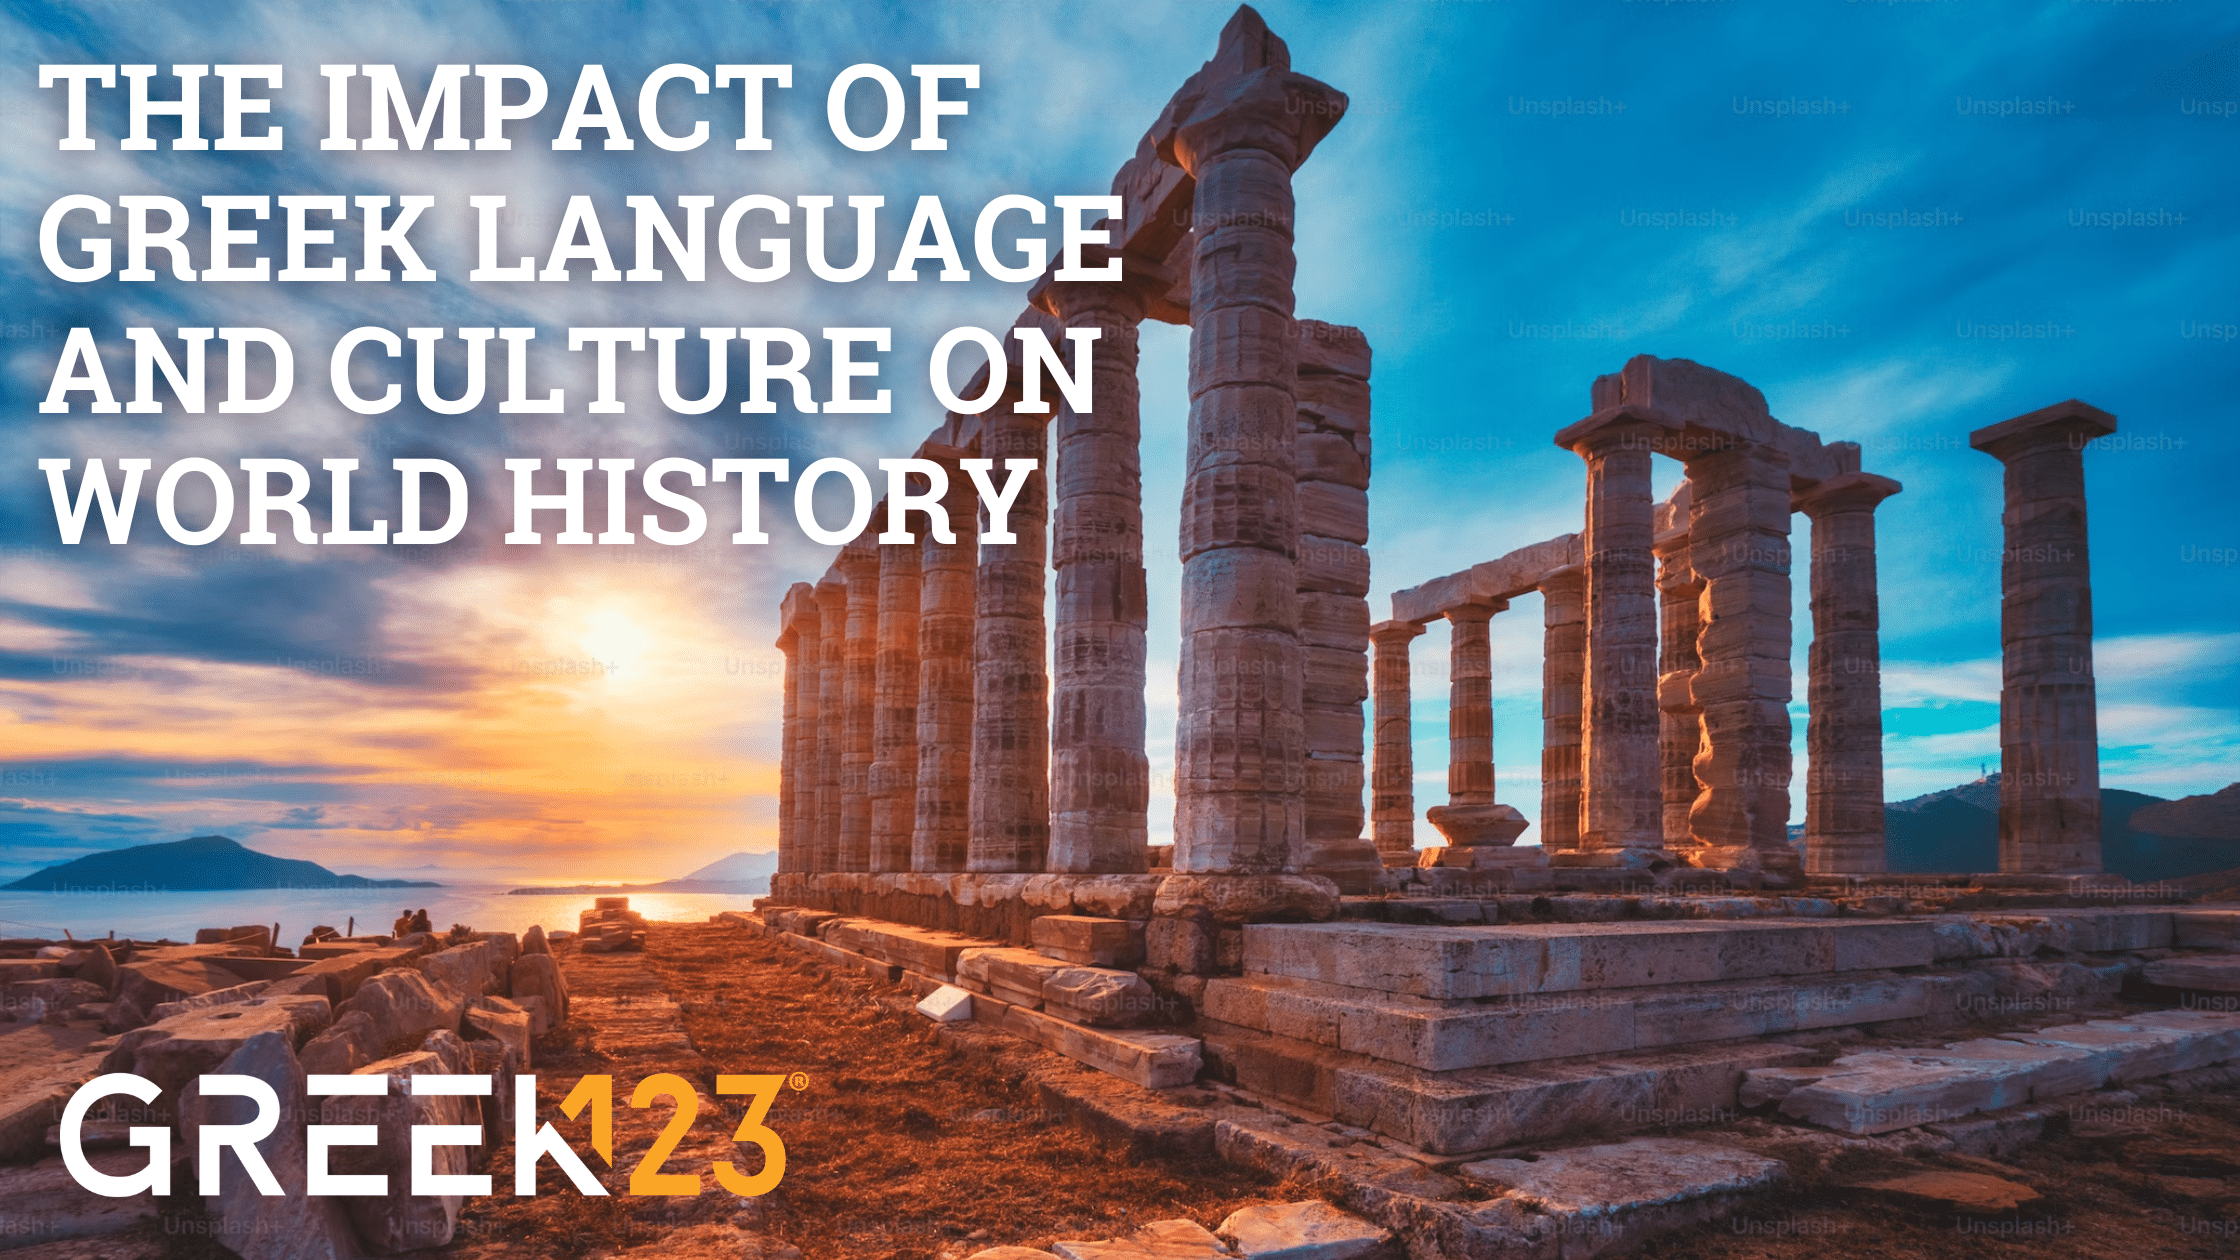 The Impact of Greek Language and Culture on World History